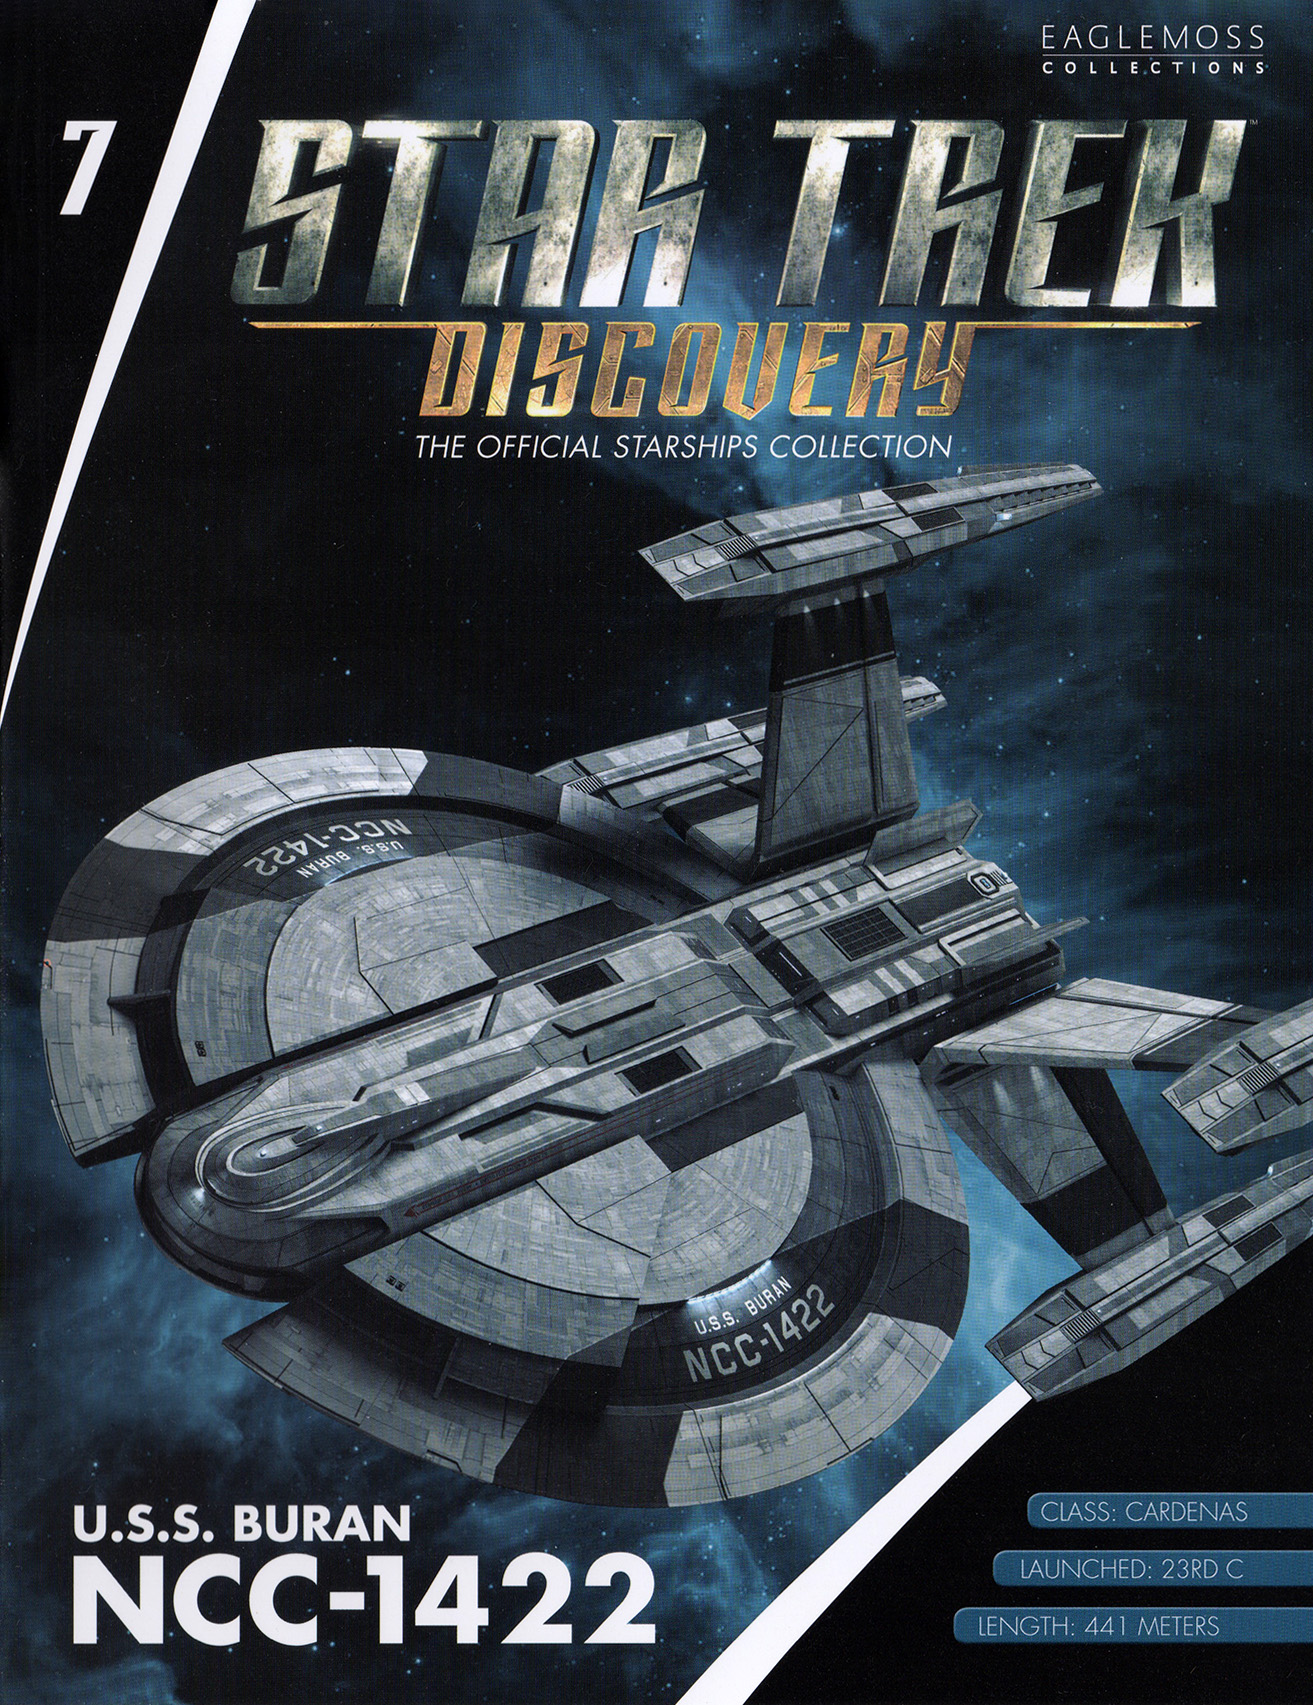 Star Trek: Discovery- The Official Starships Collection #7.jpg